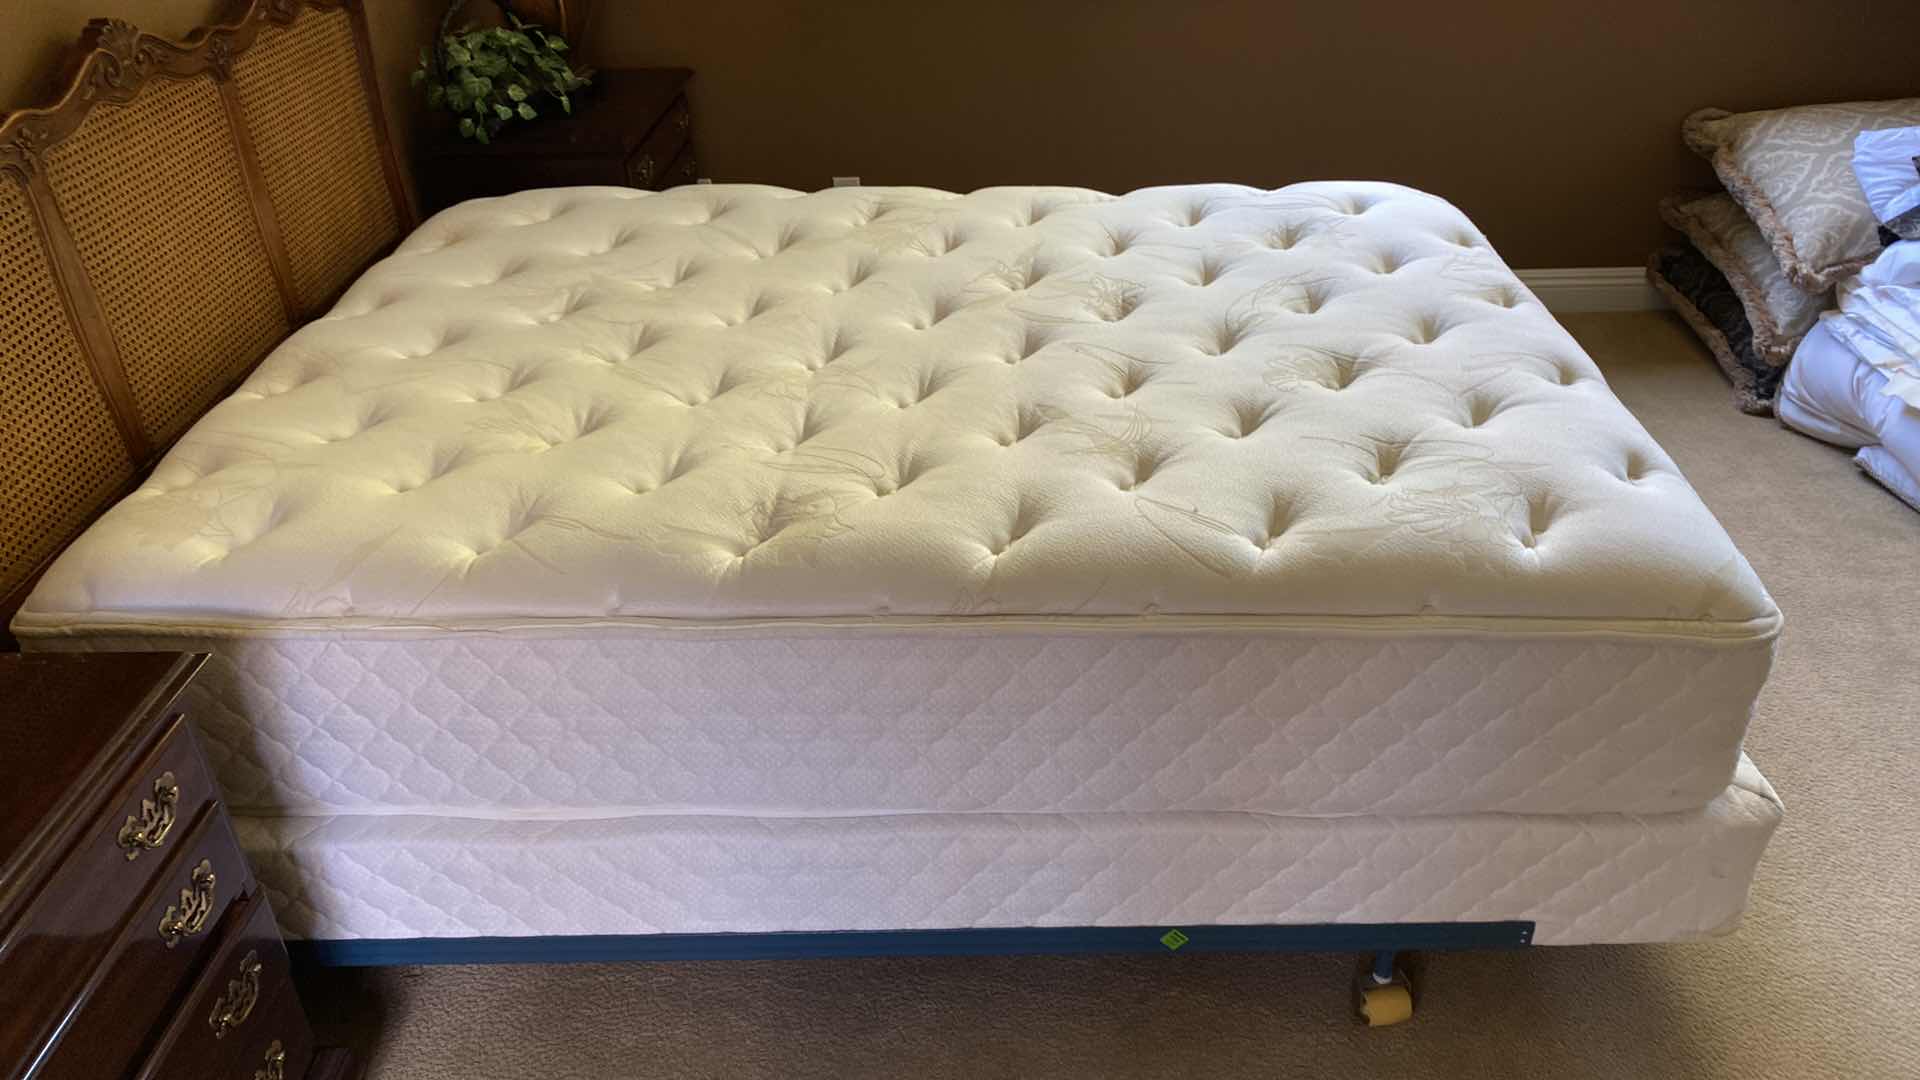 Photo 1 of KING KOIL QUEEN SIZE MATTRESS AND BOX SPRINGS AND BED FRAME 60” x 80” HEADBOARD SOLD SEPARATELY